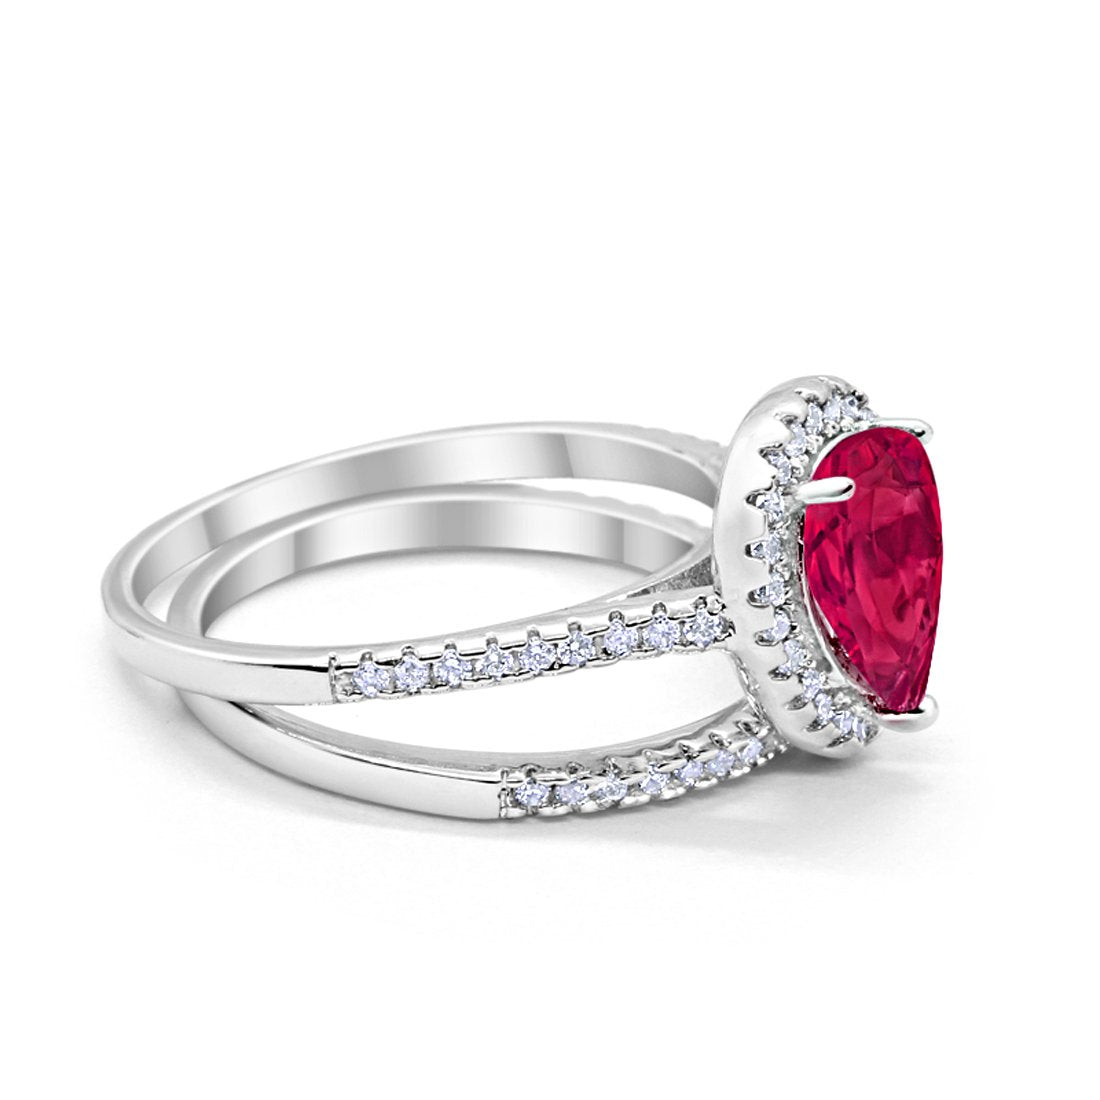 Teardrop Bridal Engagement Ring Simulated Ruby Cubic Zirconia 925 Sterling Silver